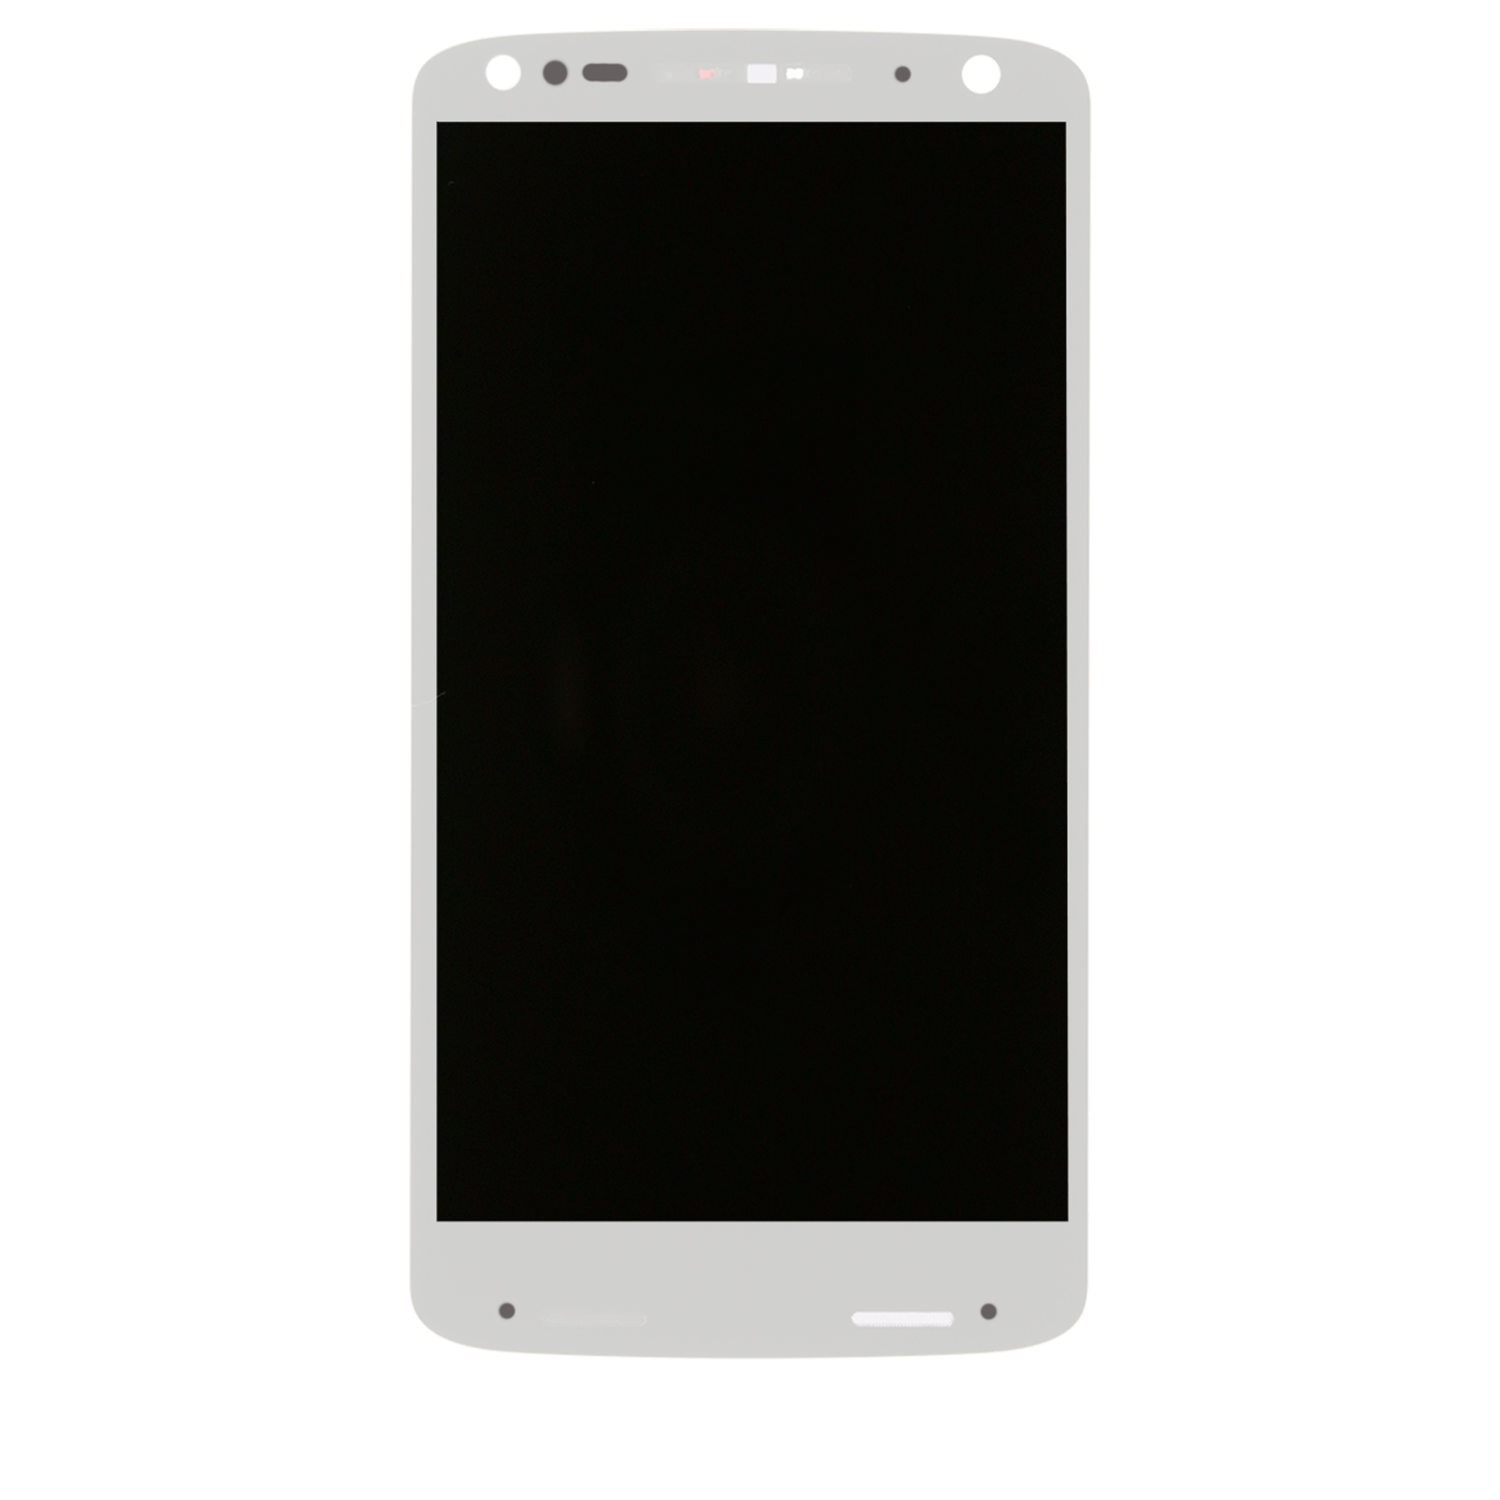 Refurbished (Excellent) - Replacement LCD Assembly With Frame Compatible For Motorola Moto X Force (XT1580 / 2015) / Droid Turbo 2 (XT1585 / 2015) (White)